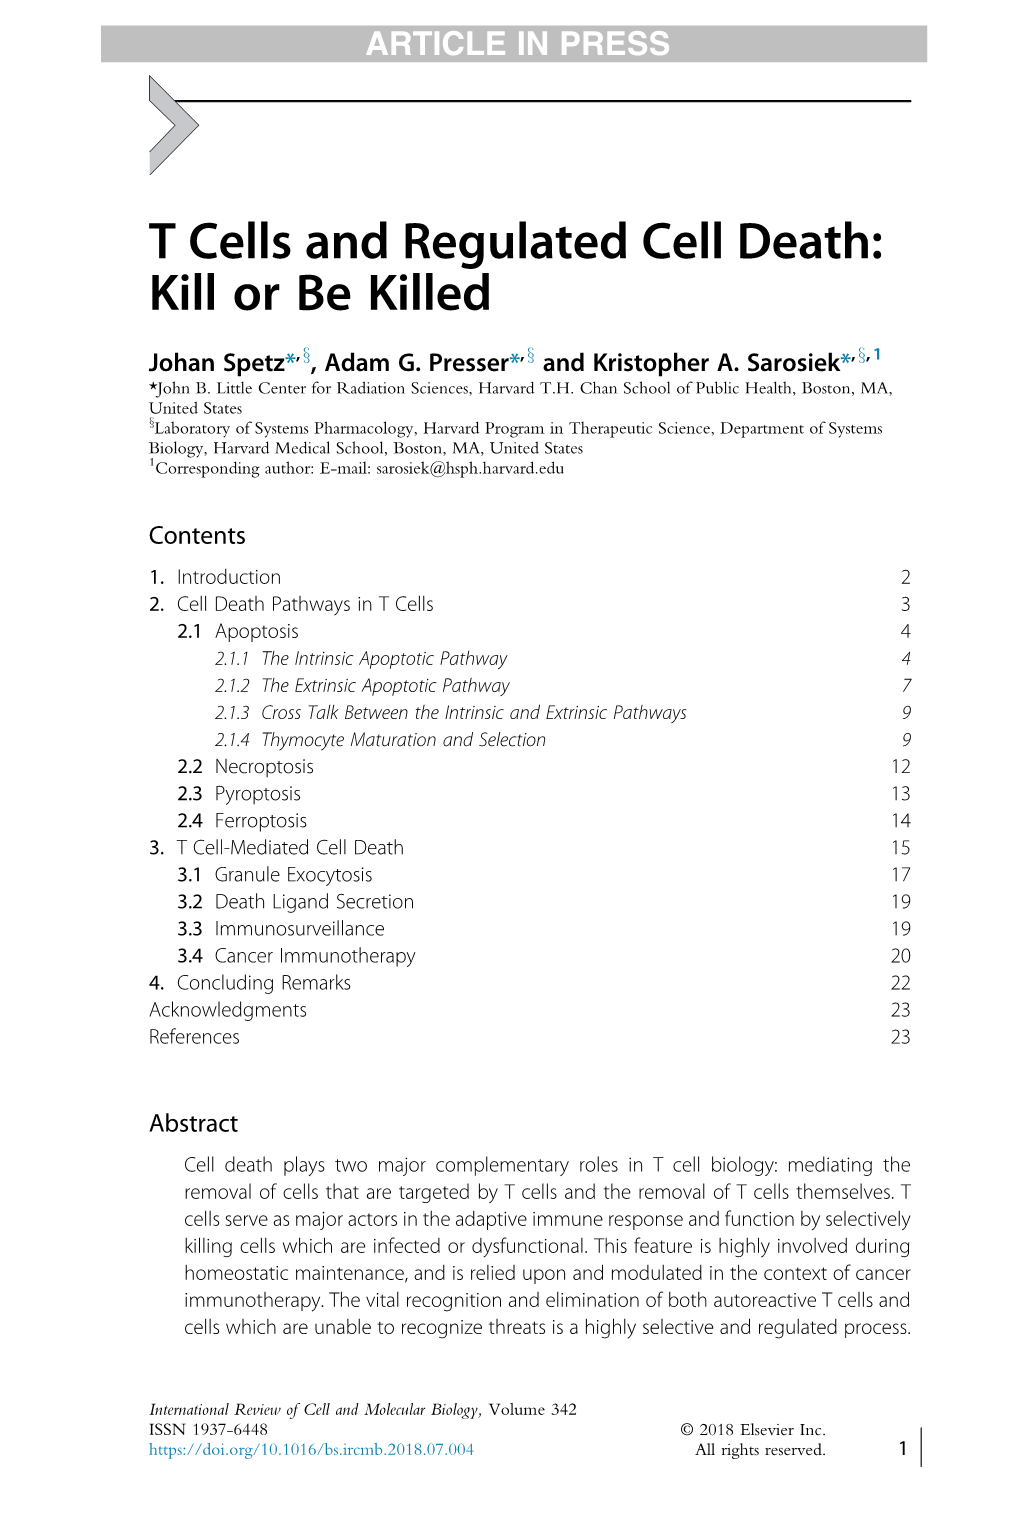 T Cells and Regulated Cell Death: Kill Or Be Killed